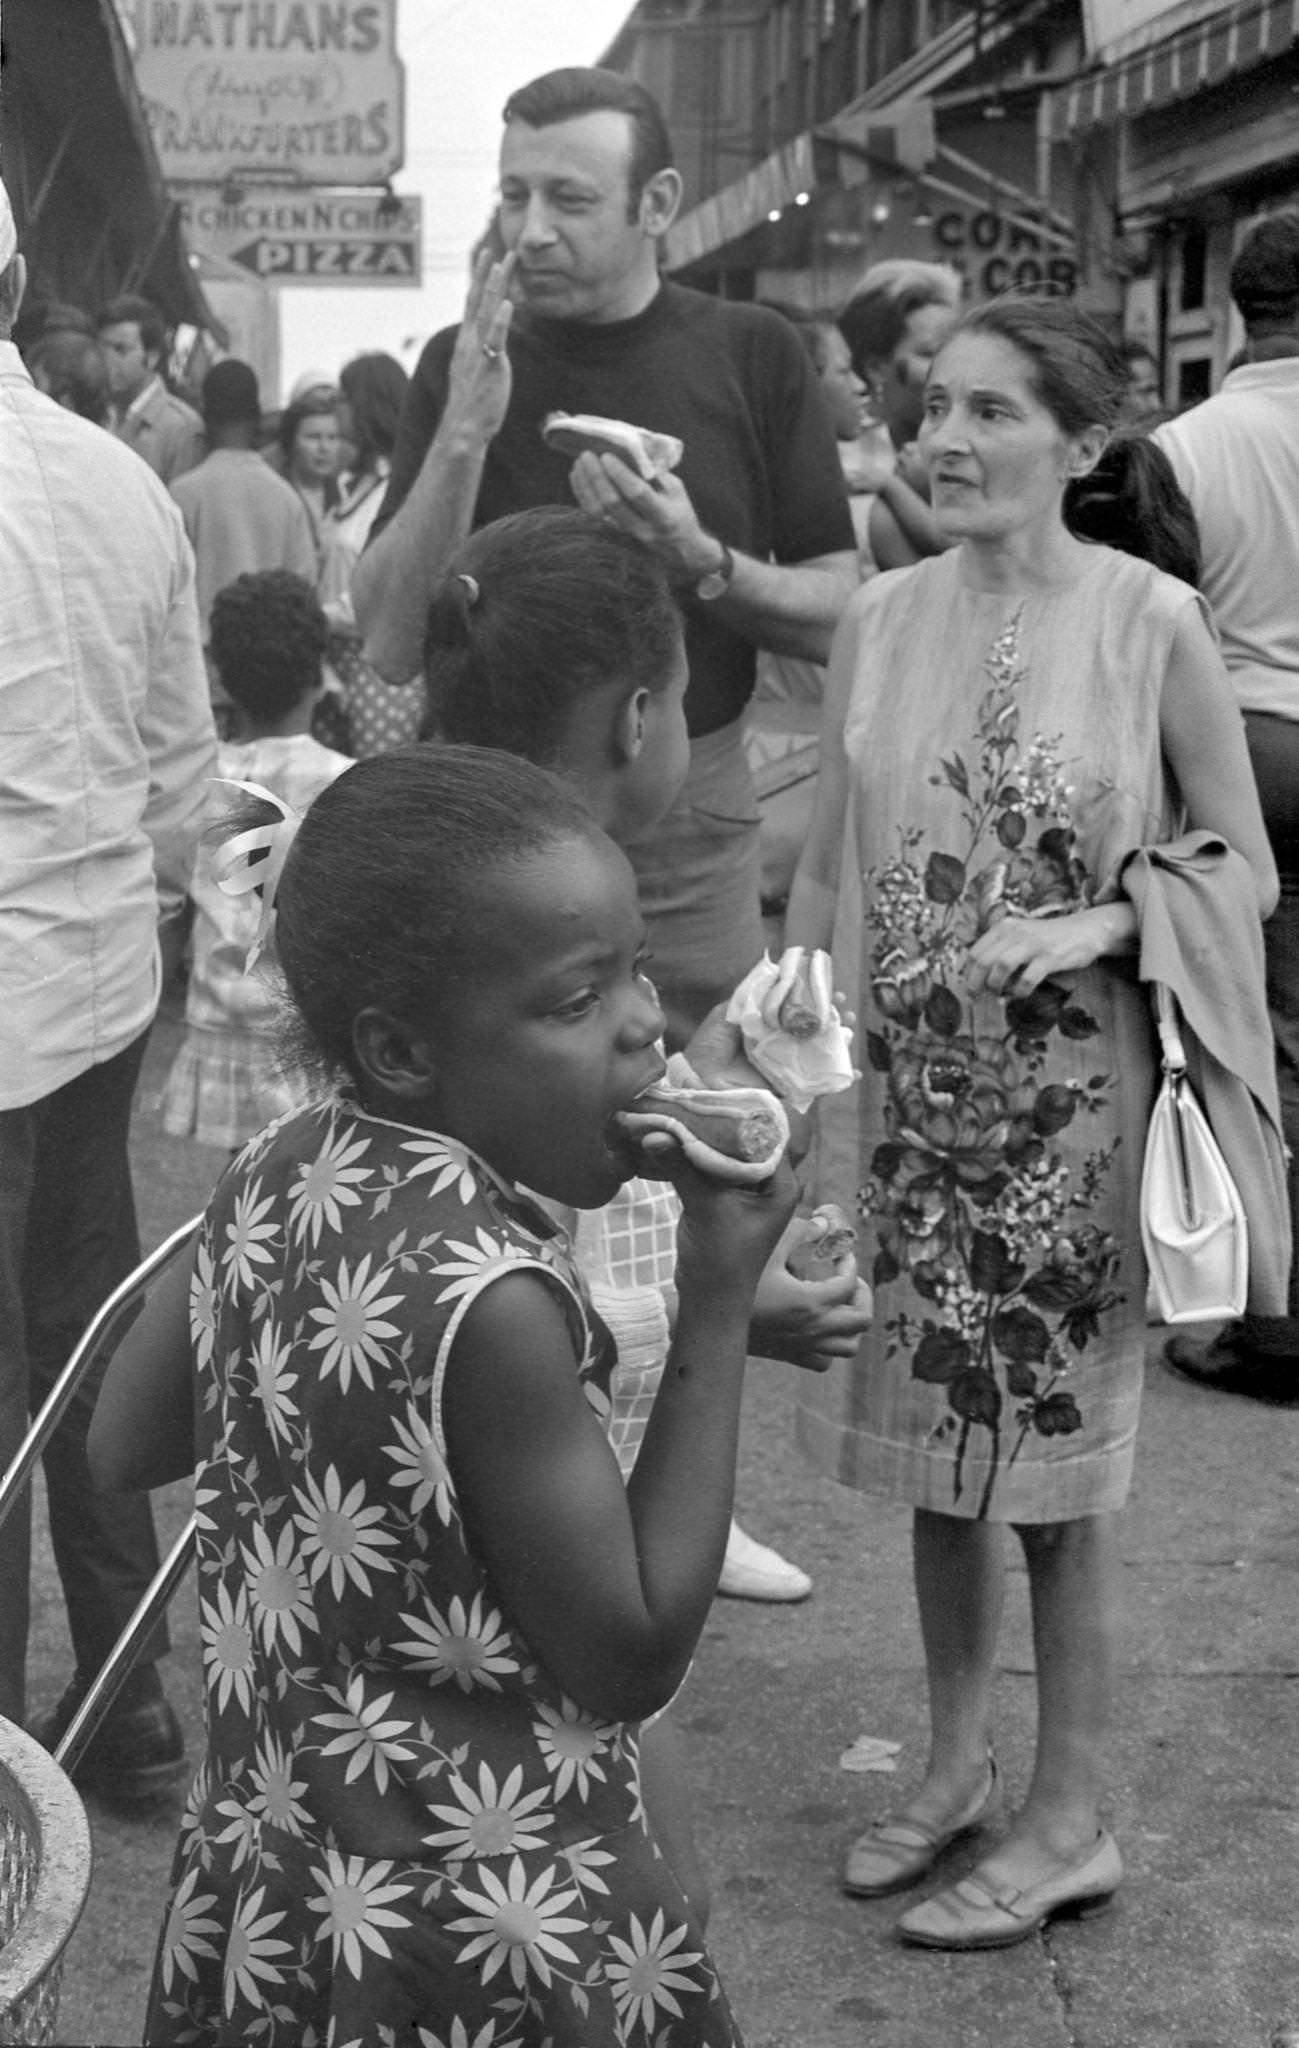 Young Girls Eating Hot Dogs At Coney Island, 1968